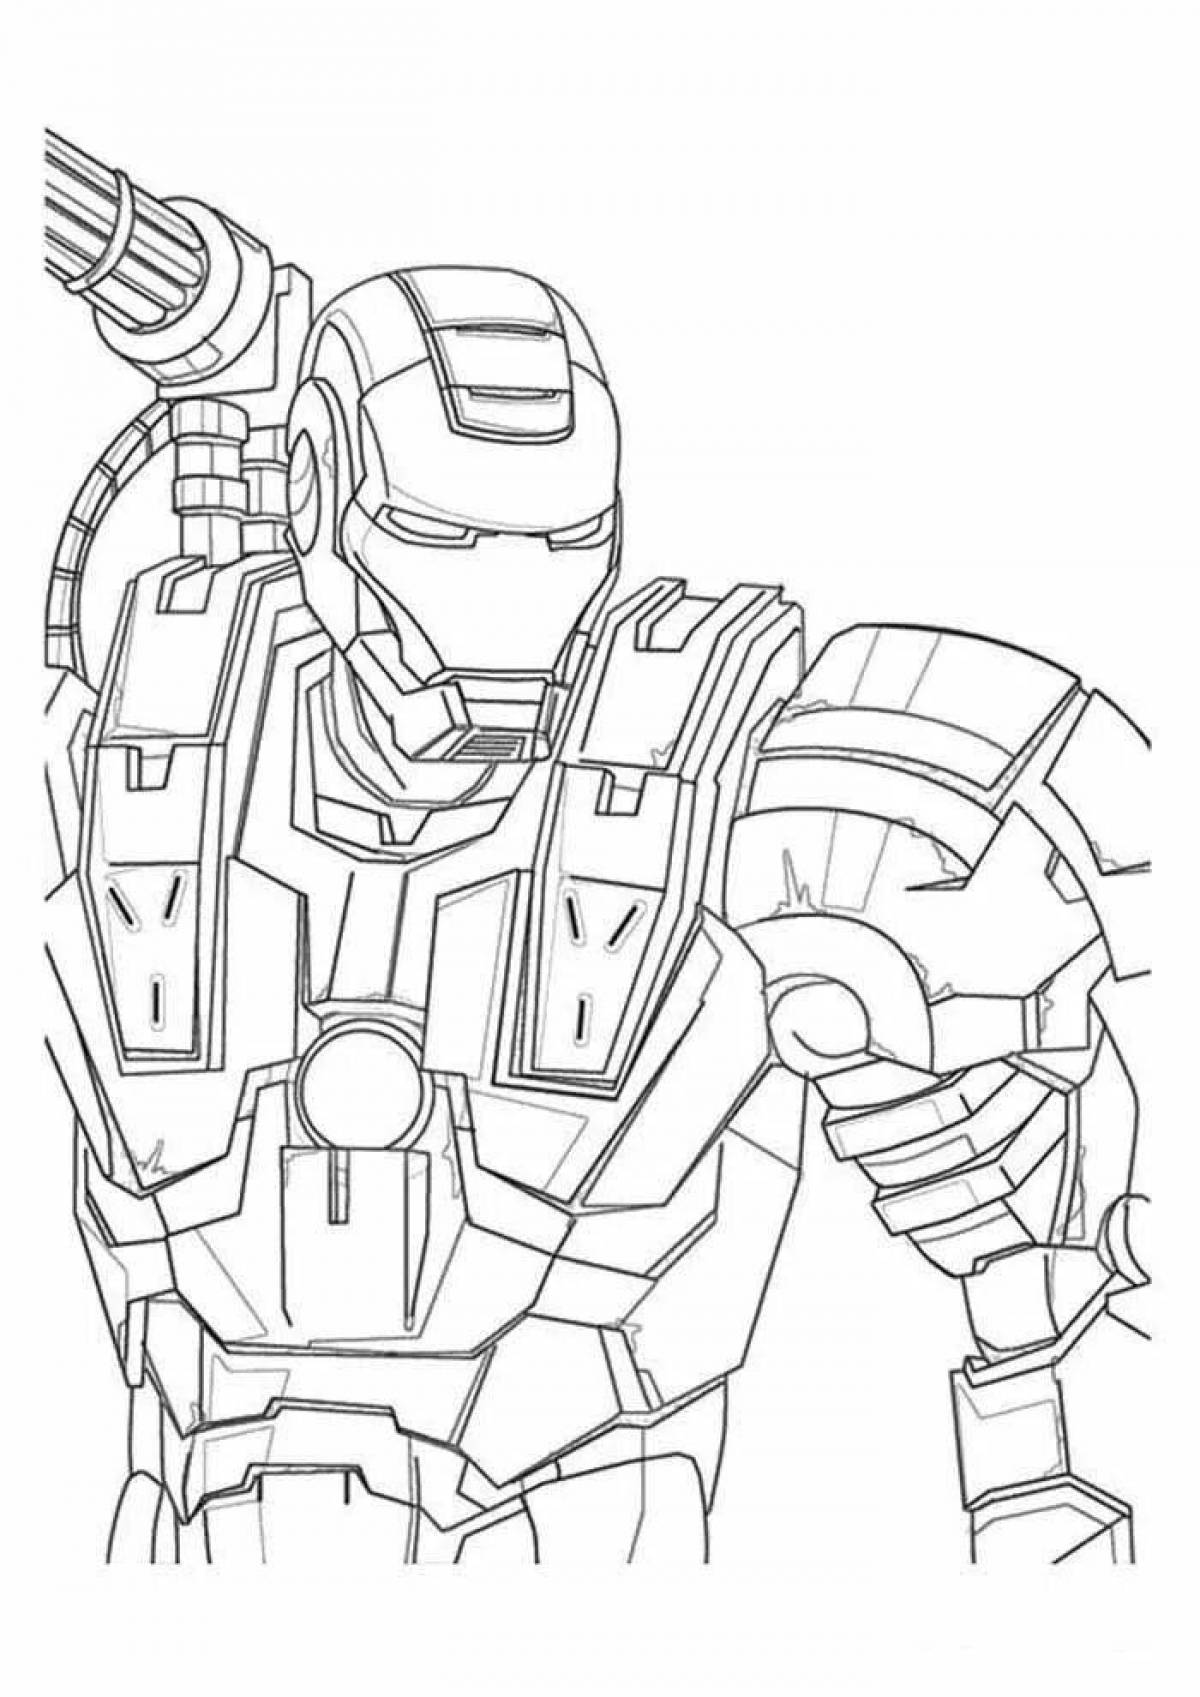 Grand iron patriot coloring page